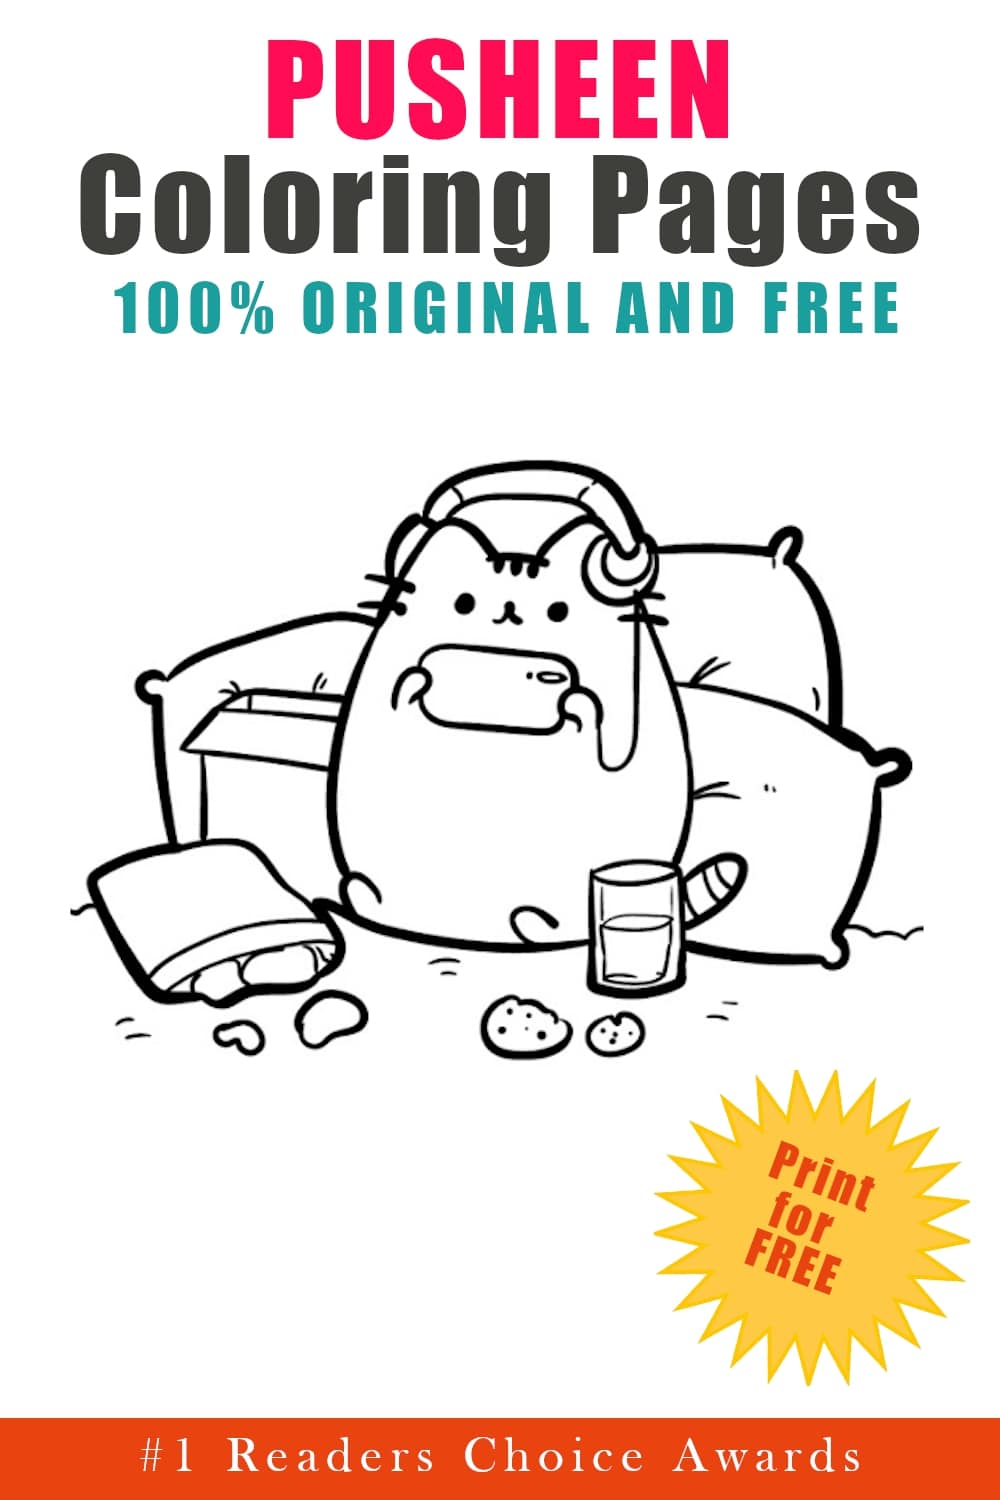 original and free pusheen coloring pages free printable